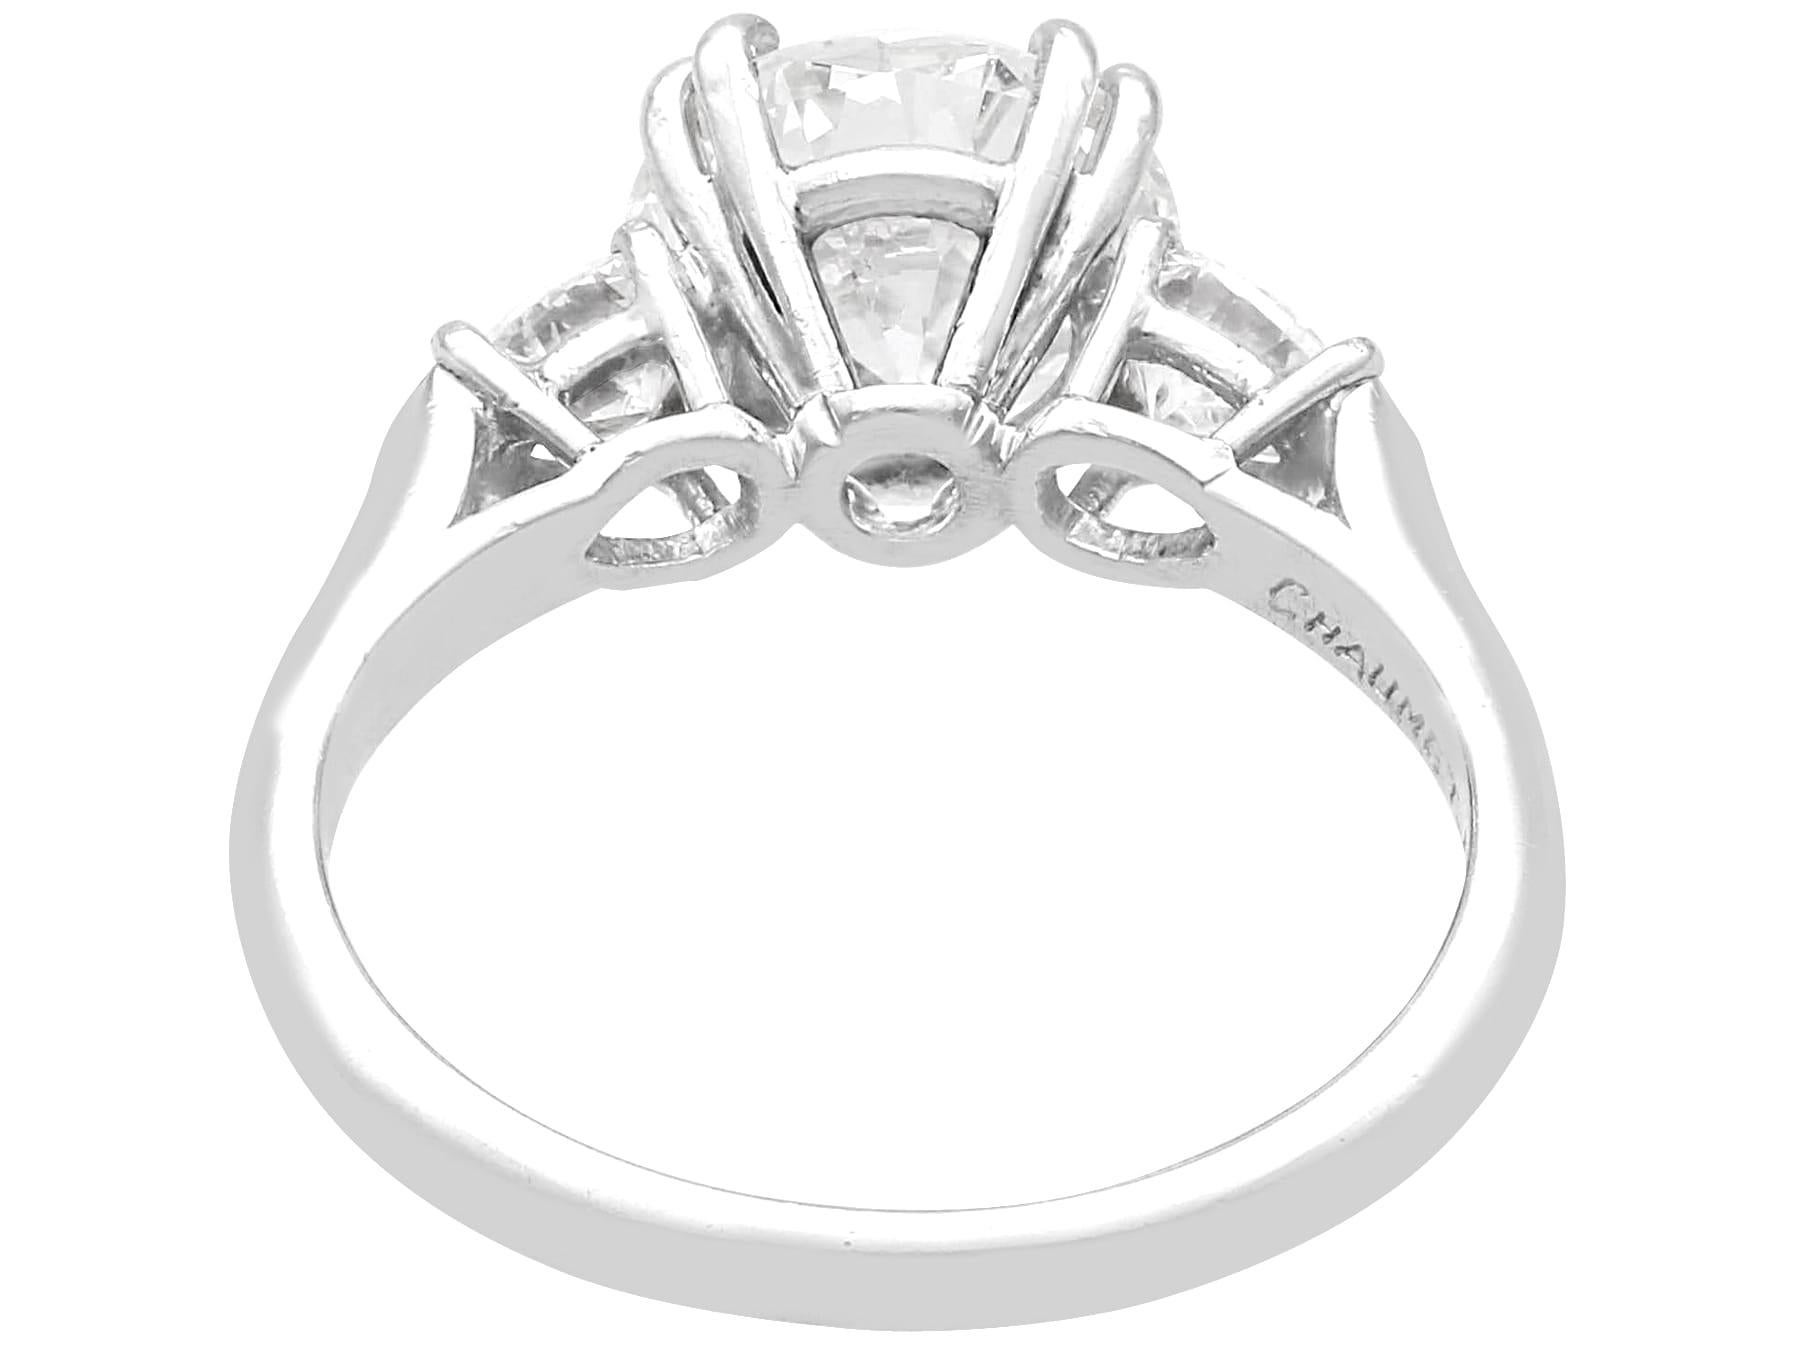 1930s Antique 1.92 Carat Diamond and Platinum Solitaire Ring In Excellent Condition For Sale In Jesmond, Newcastle Upon Tyne